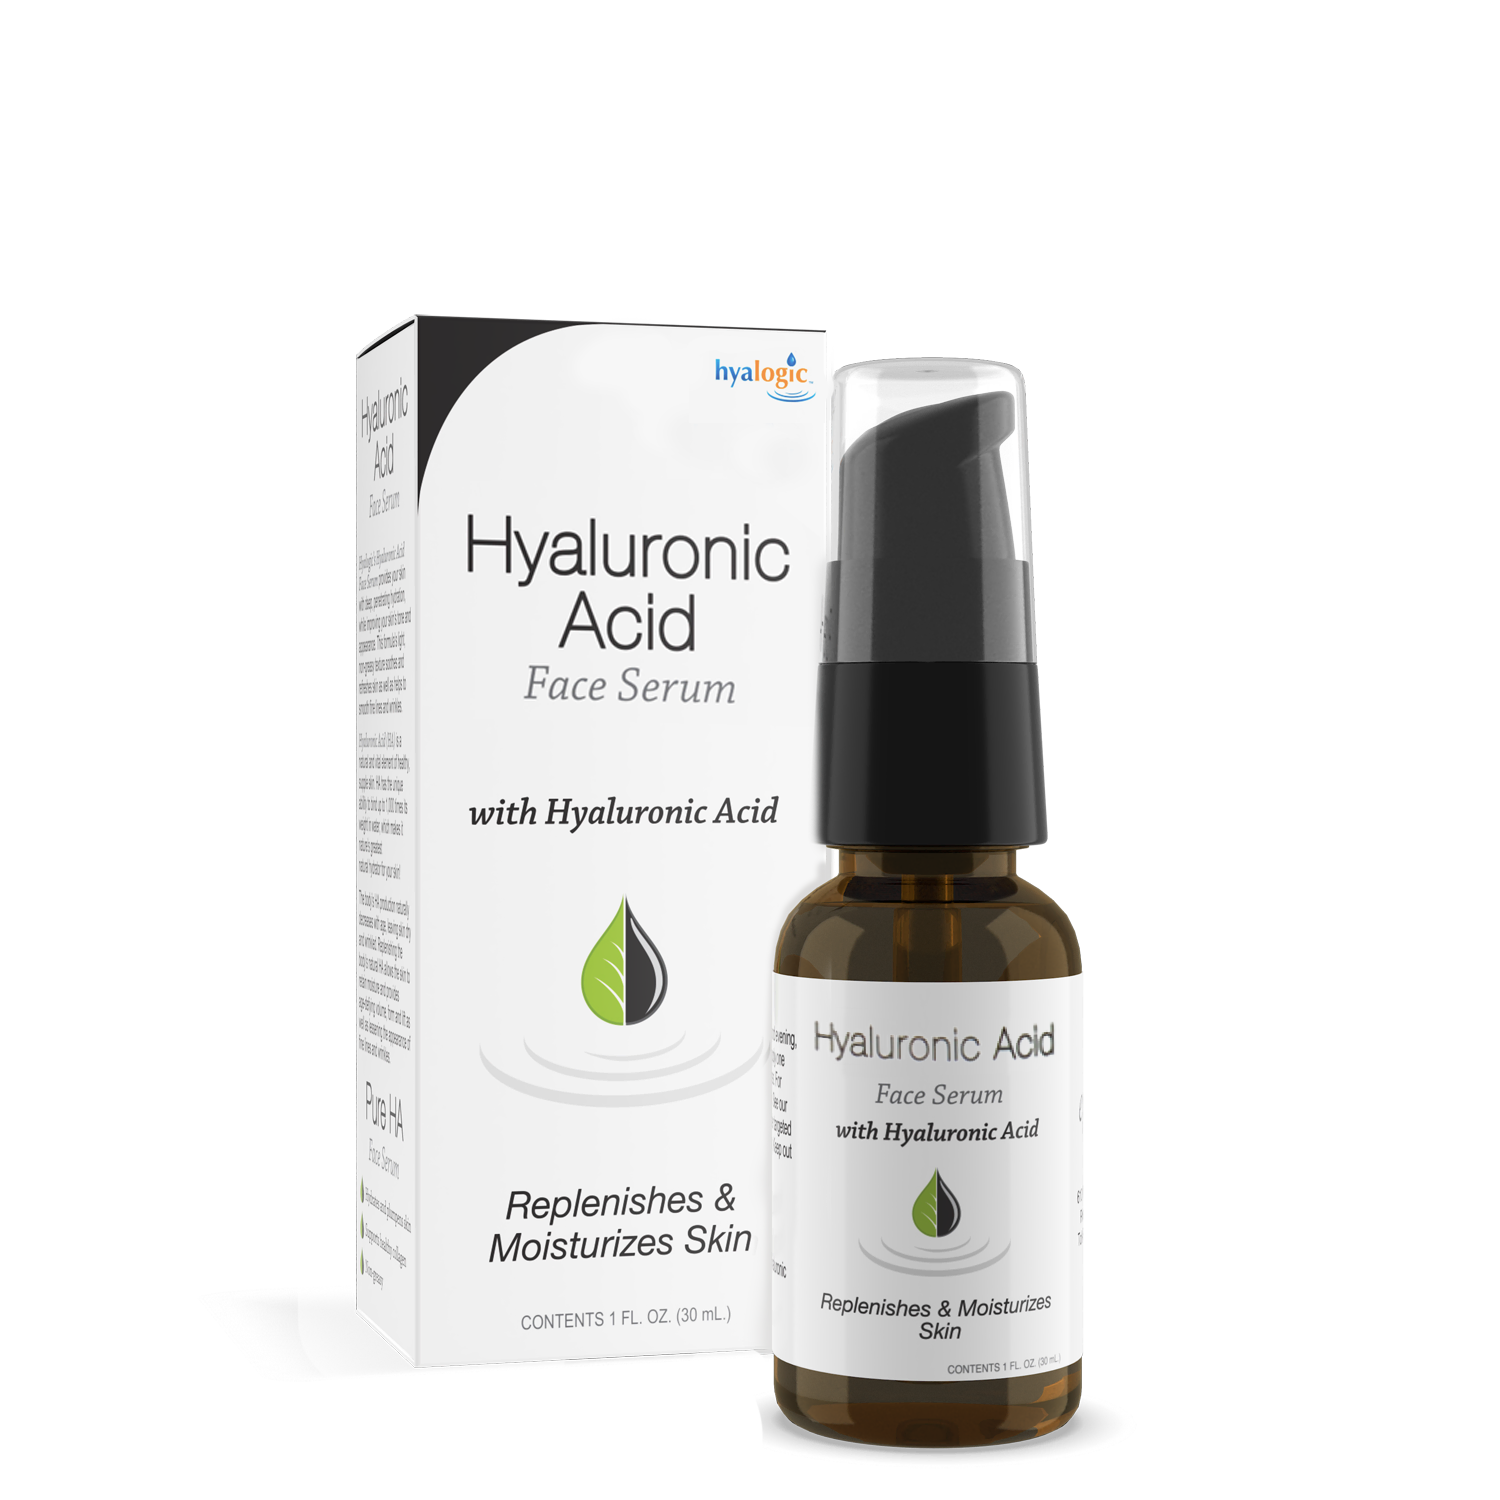 Hyaluronic Acid Face Serum E and E Pharmaceuticals